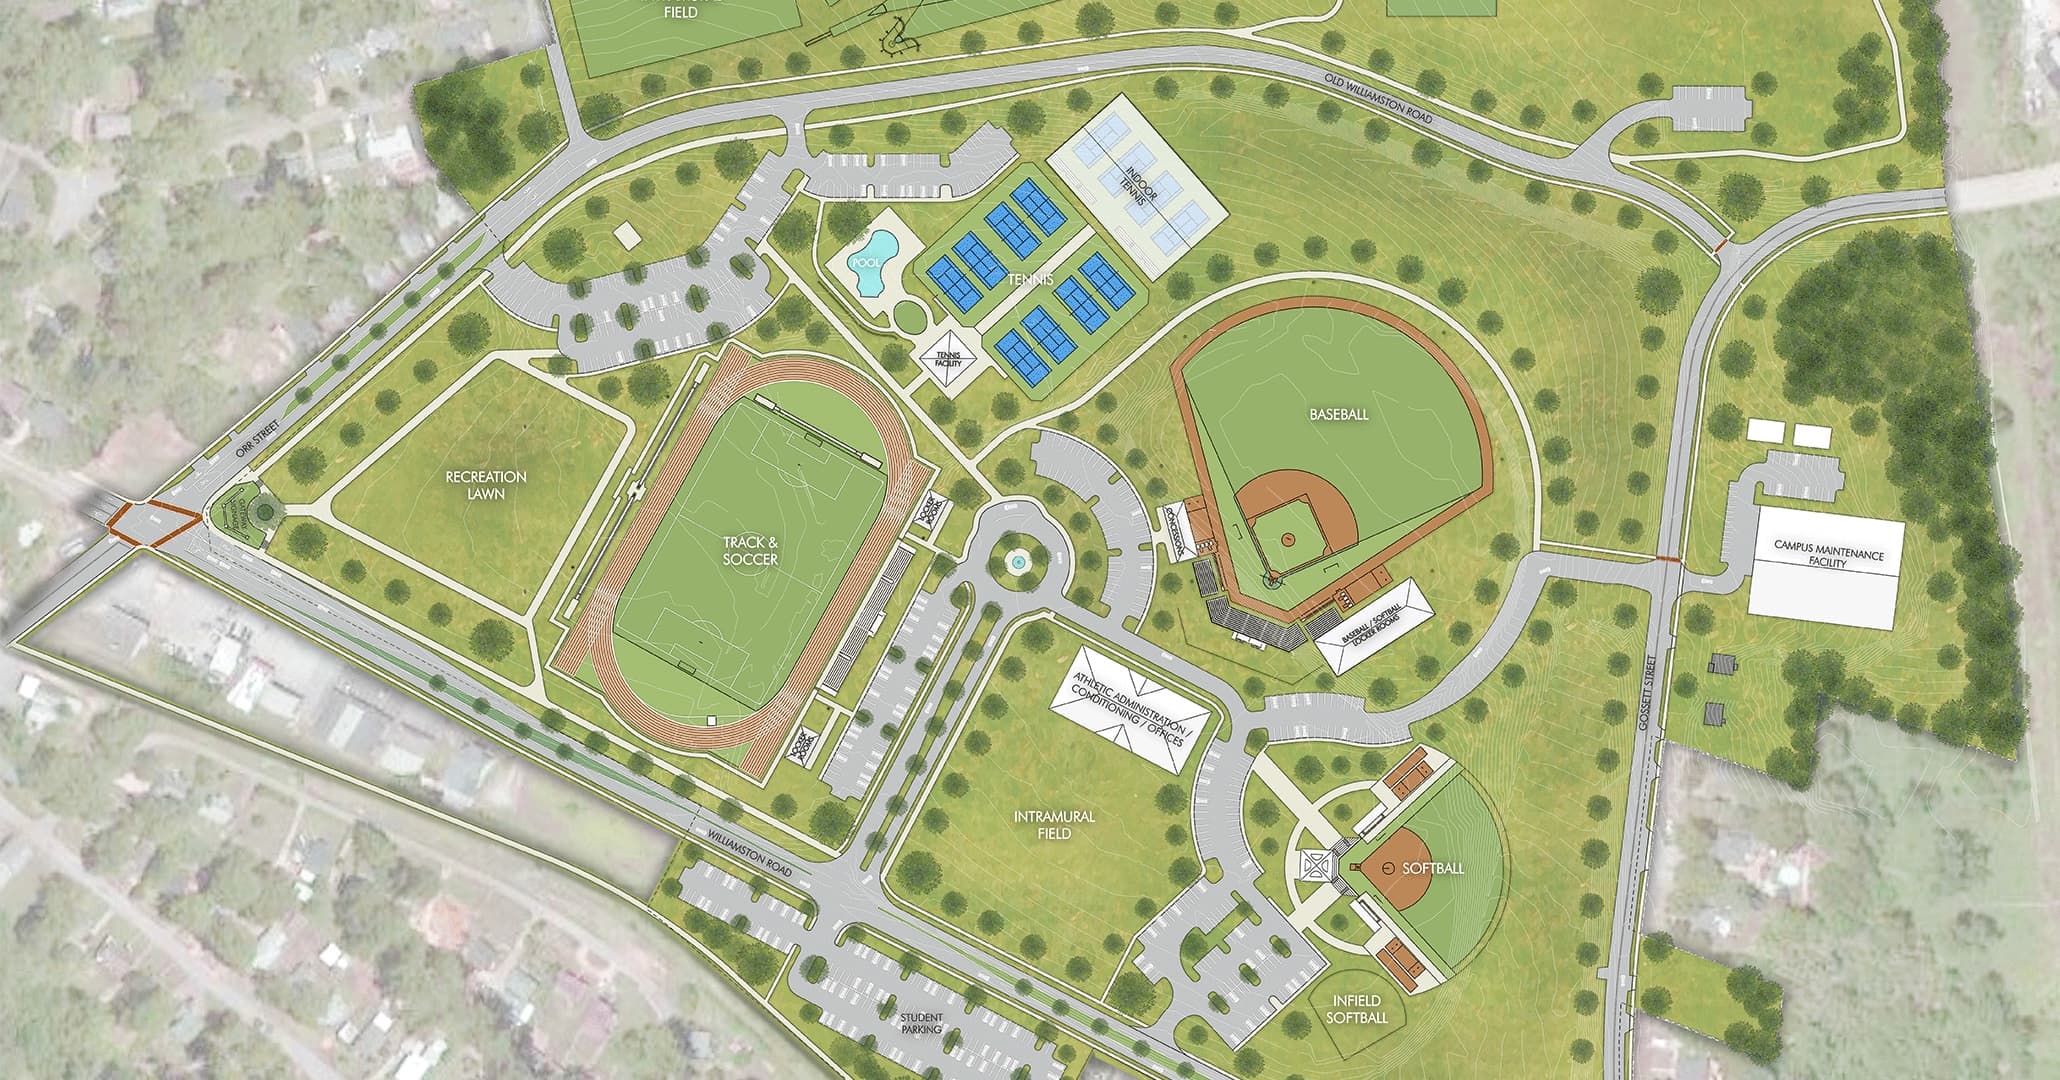 Boudreaux architects and planners created a site plan that will help Anderson University Athletics grow.